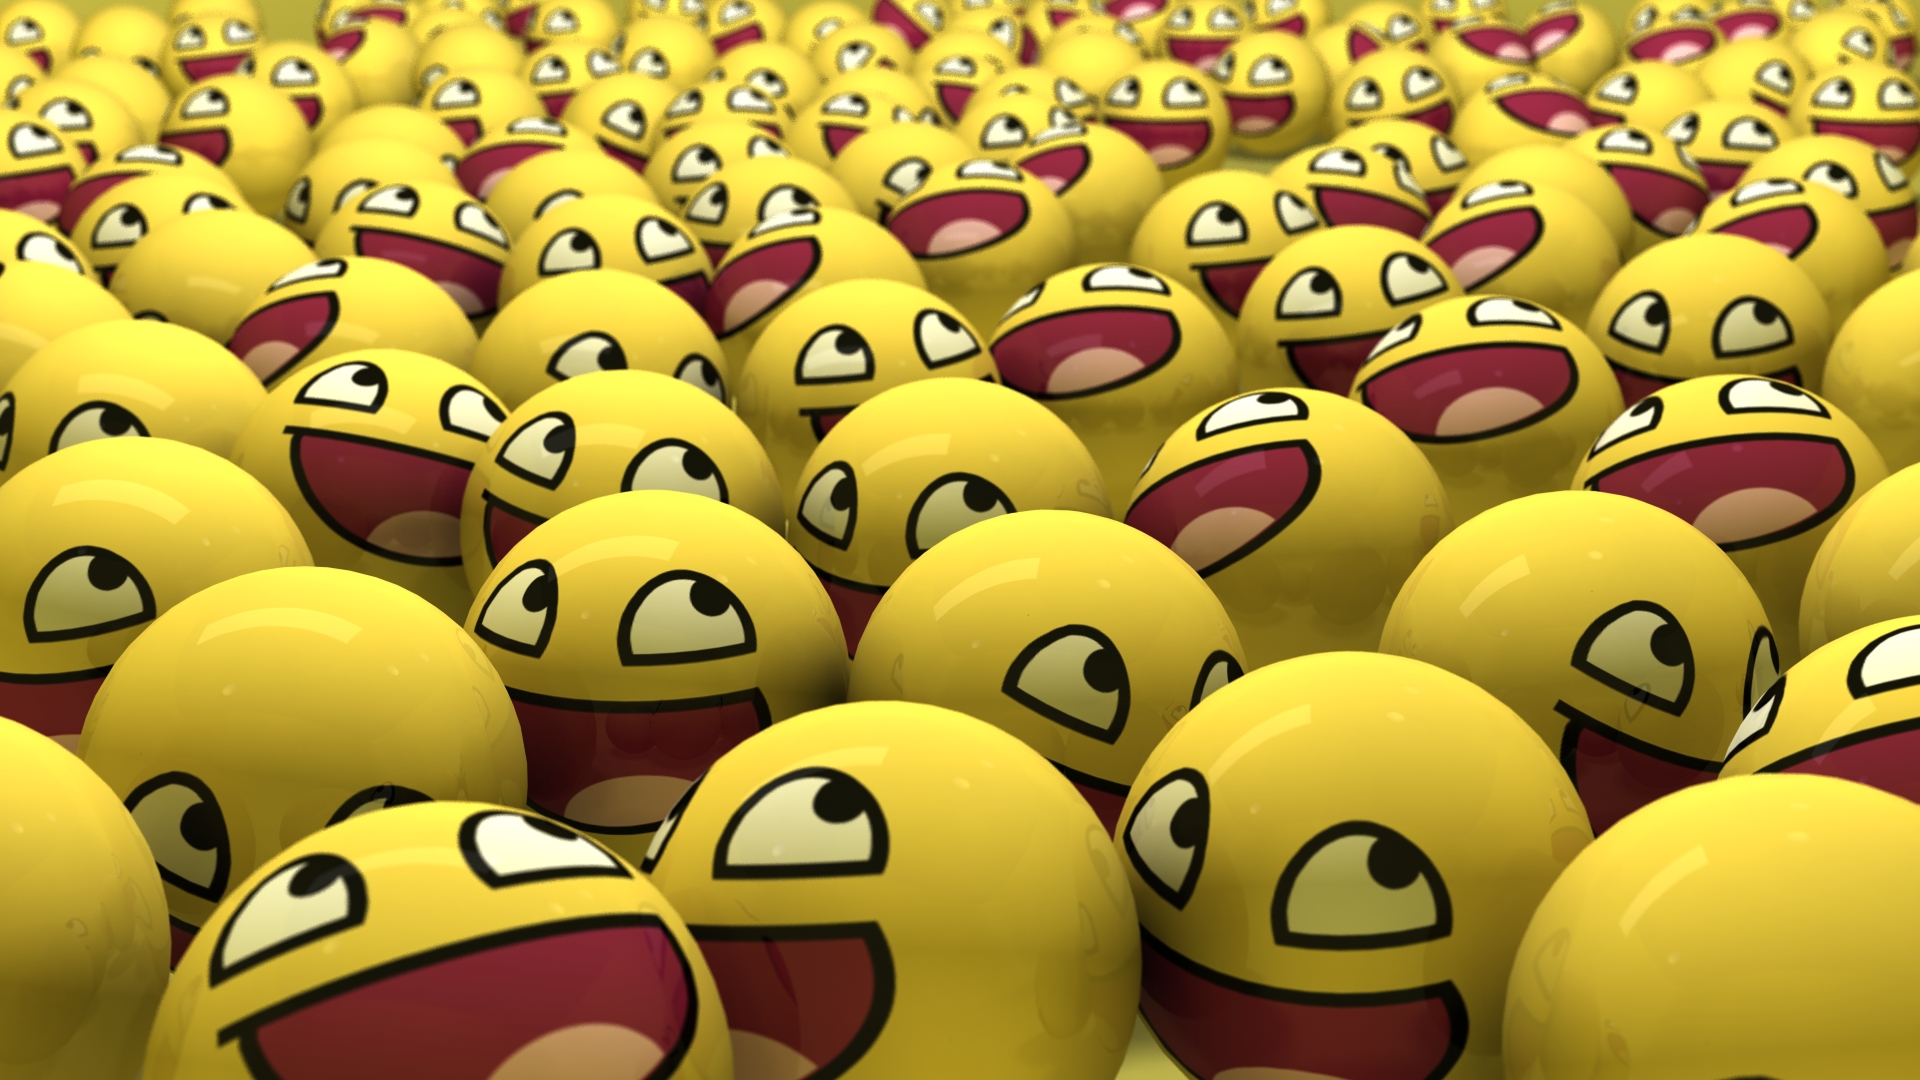 Awesome Wallpaper Faces Imagenes Smiley Wankingweiner